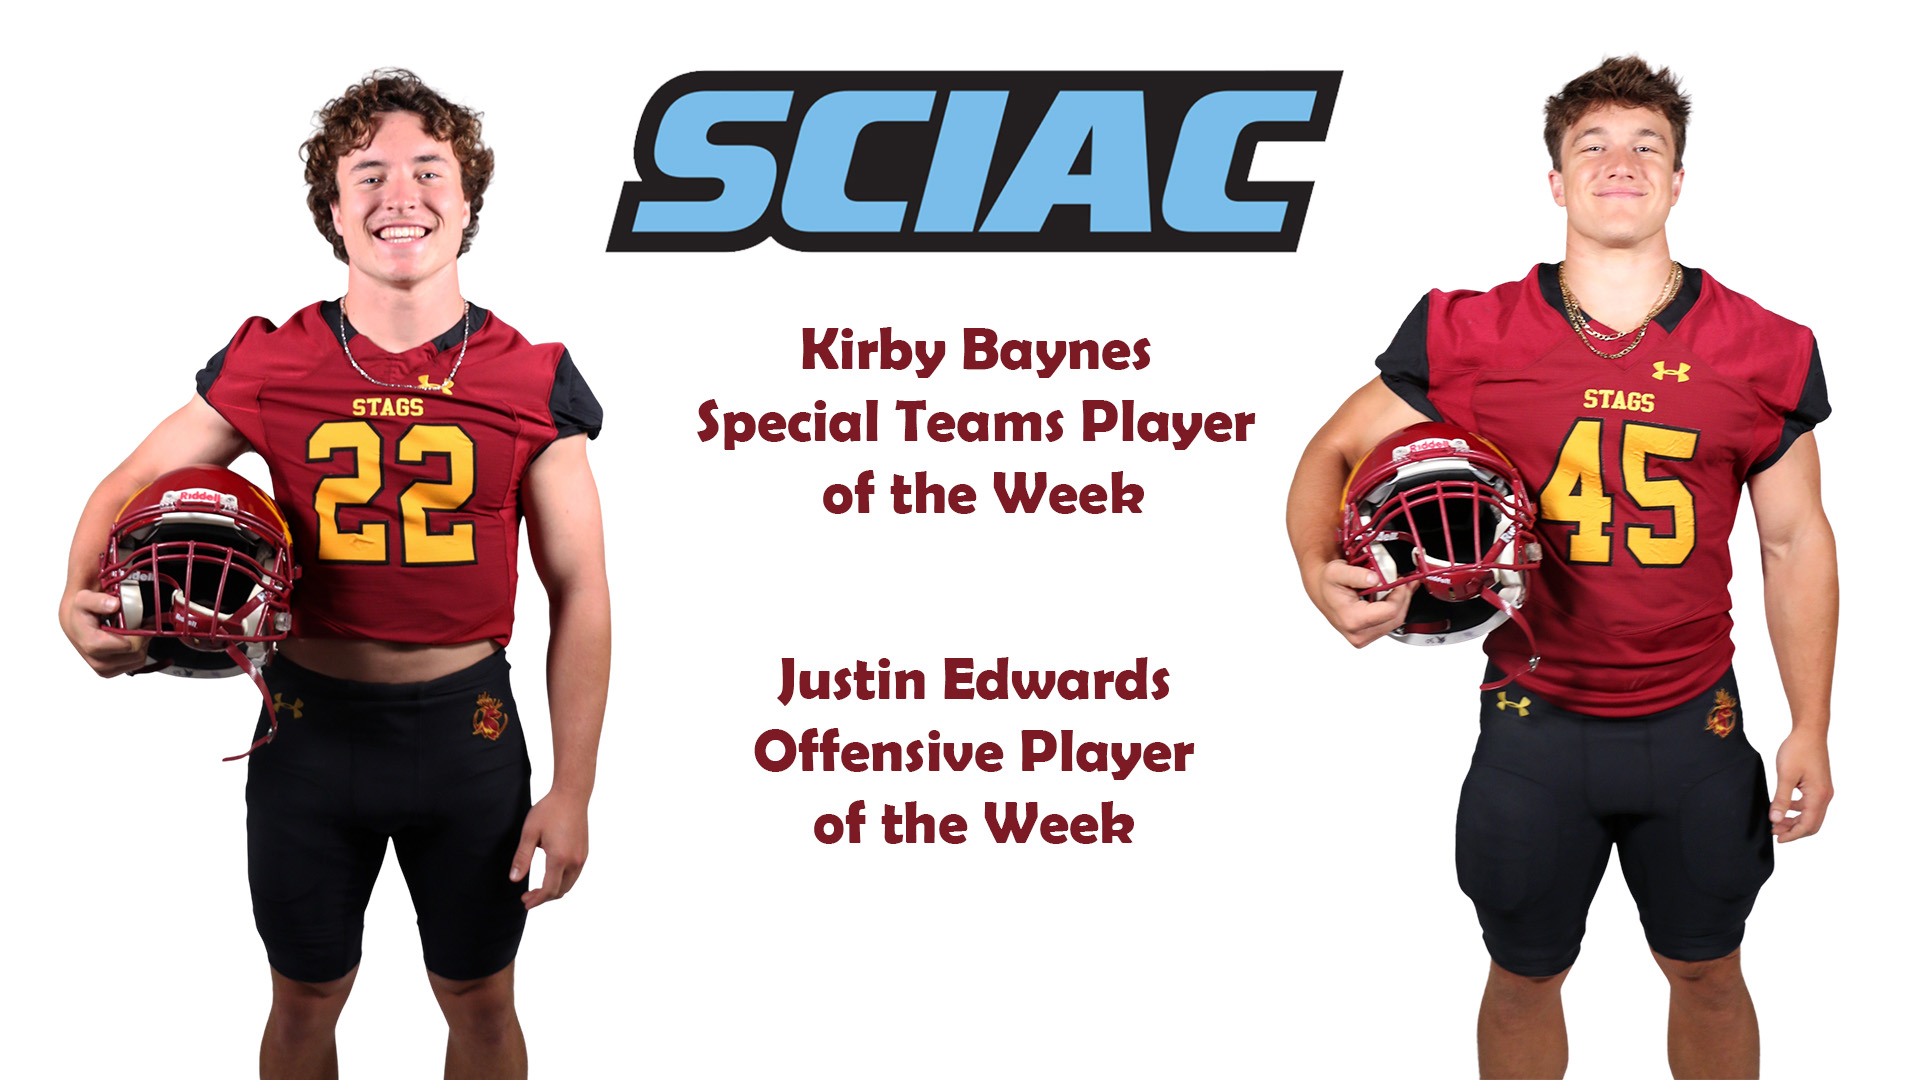 posed shots of Kirby Baynes and Justin Edwards with the SCIAC logo